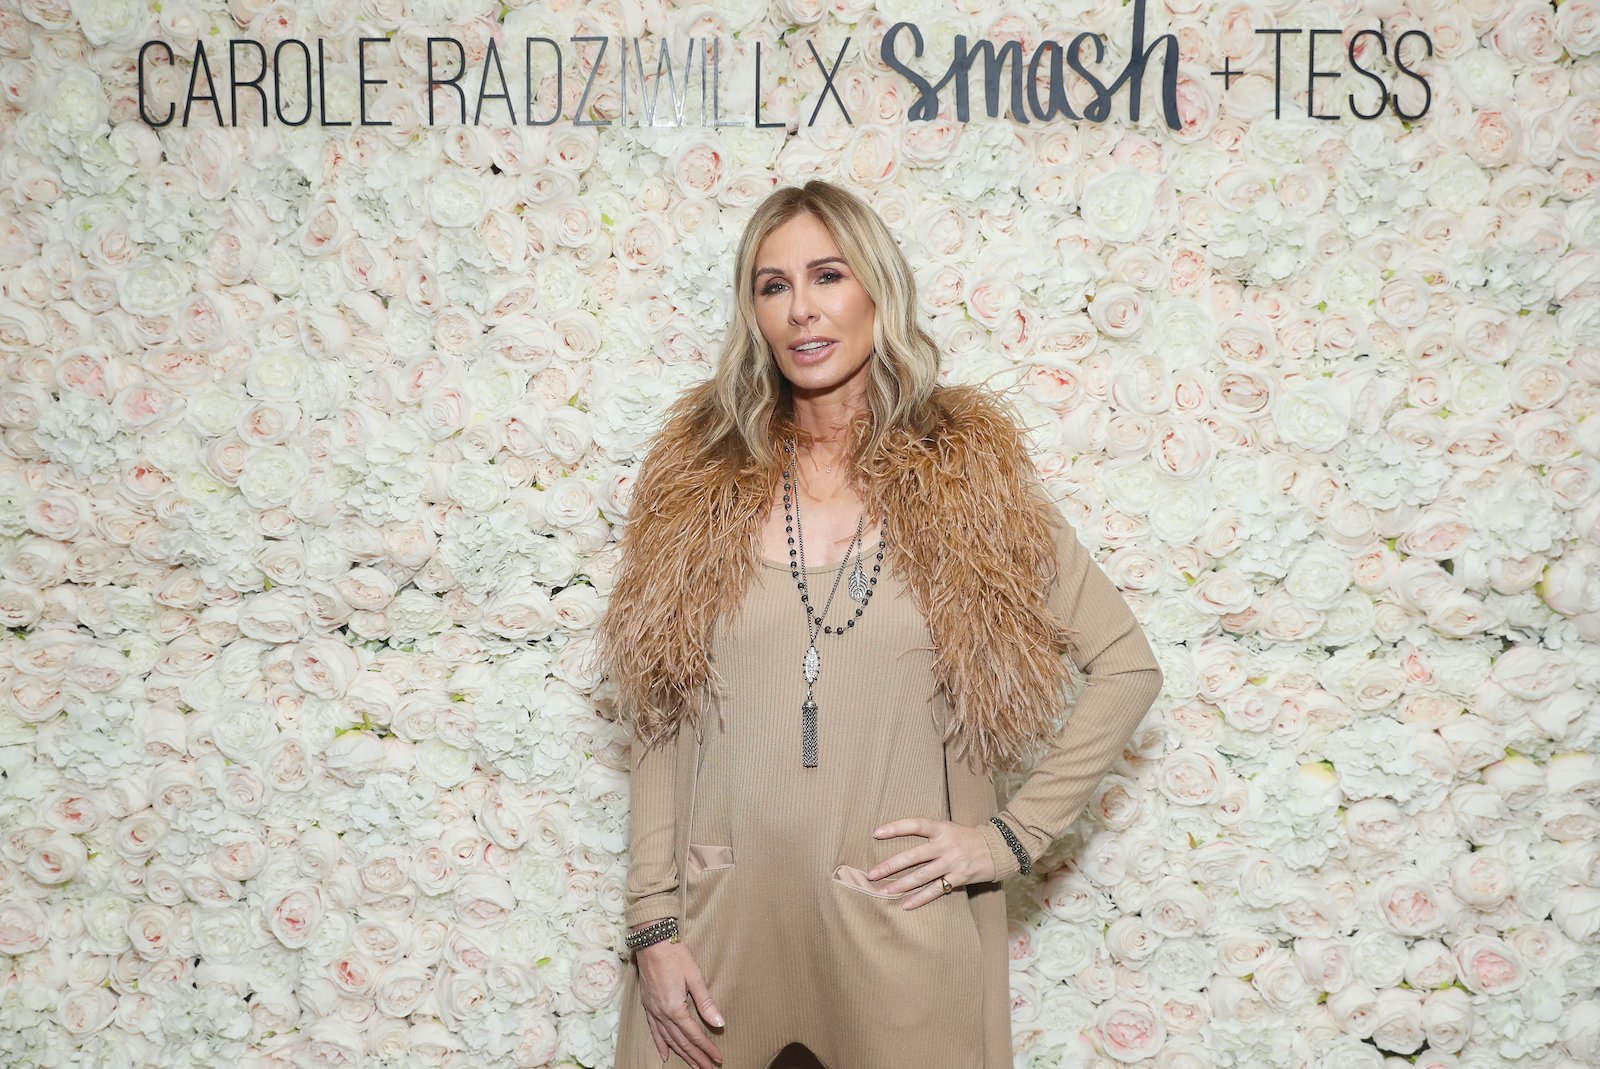 Carole Radziwill wearing a brown and tan outfit poses in front of a flowered backdrop.